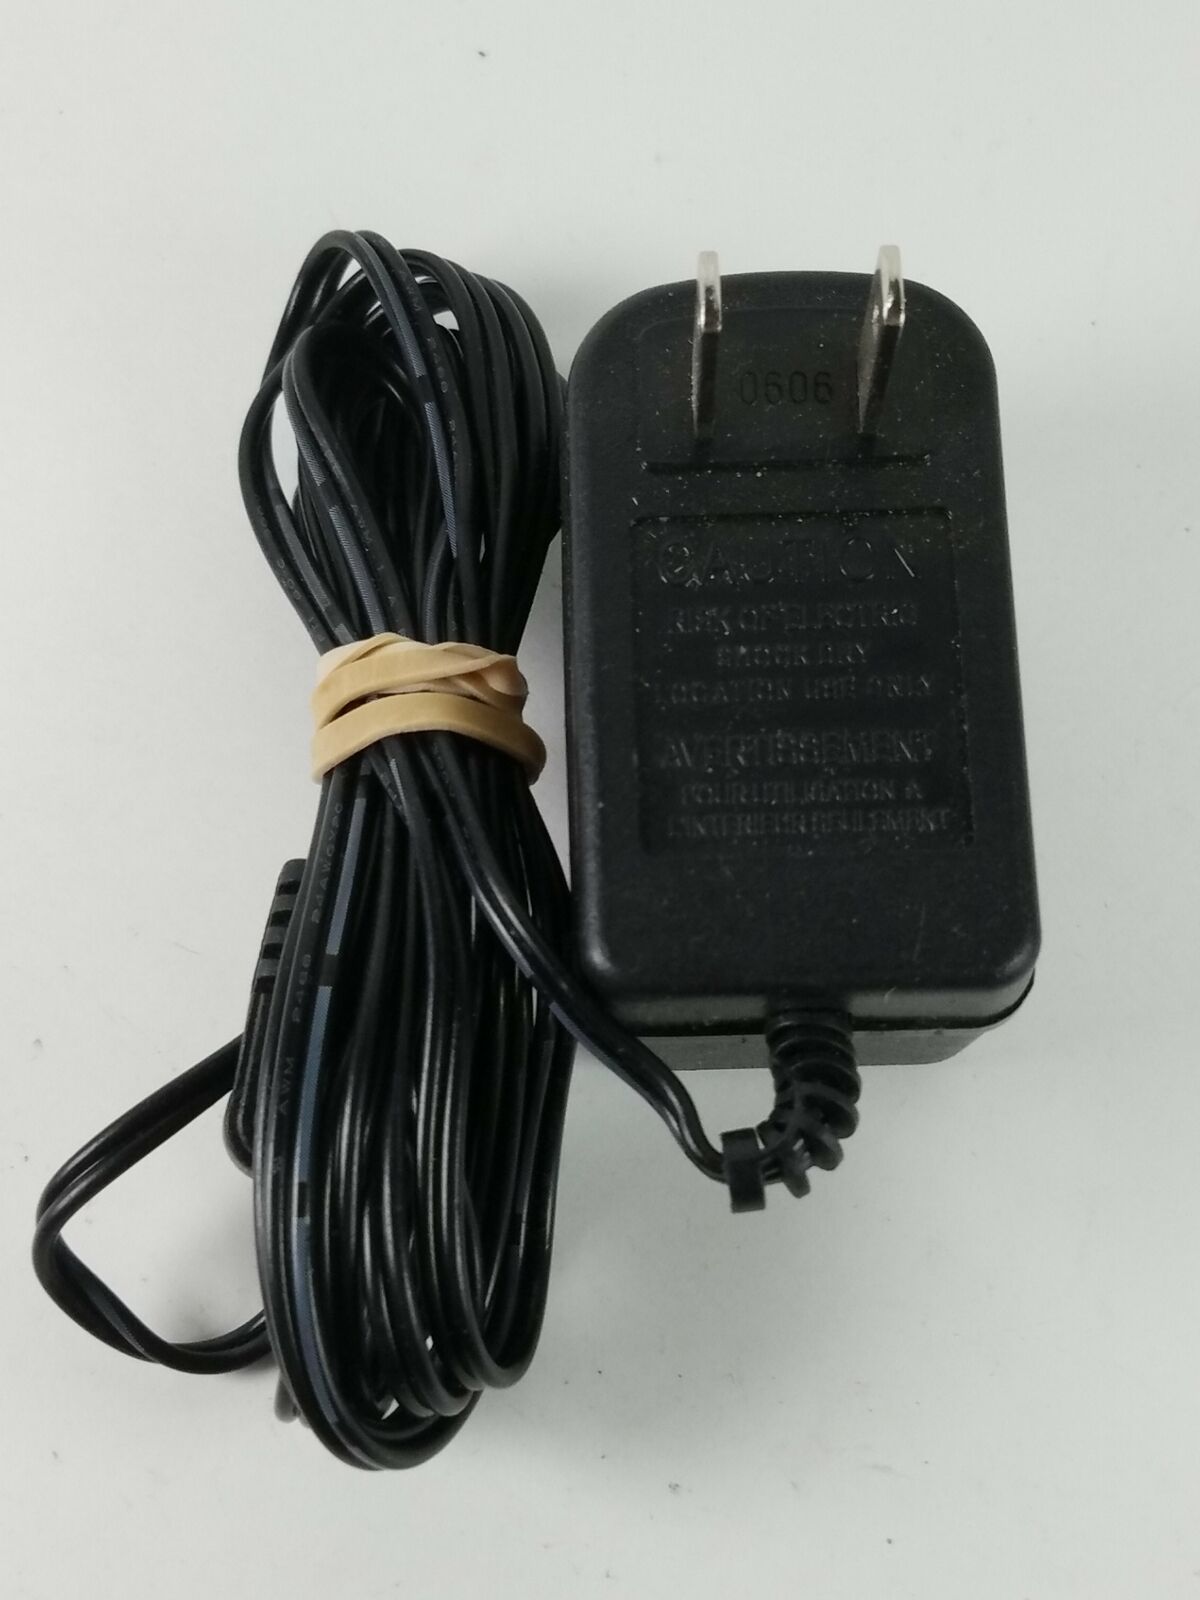 New AC Adapter MUA2809300 Charger Power Supply 9VAC 300mA - Click Image to Close